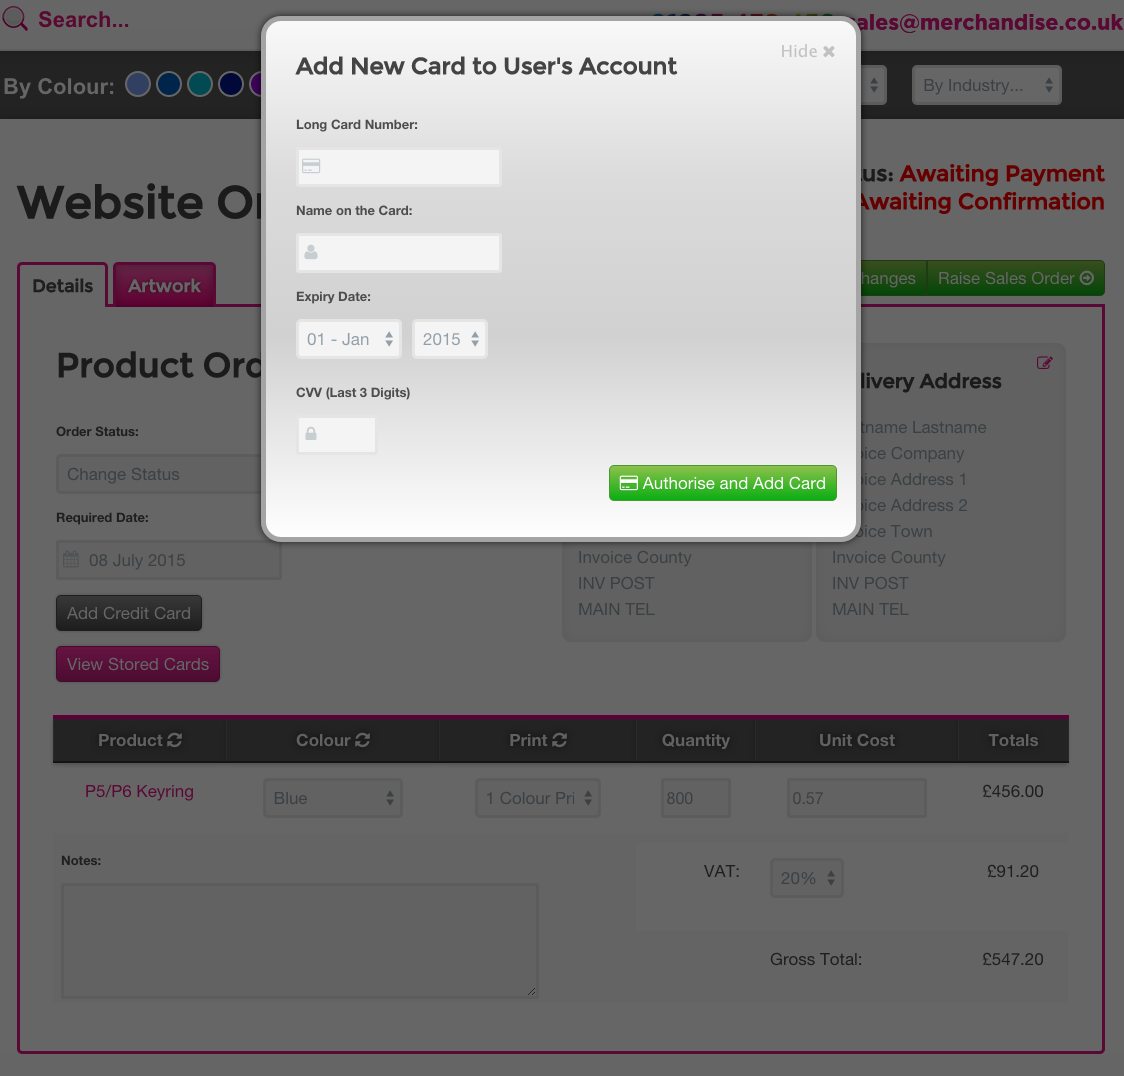 You can also add another credit card to the user's account that can later be used for payment